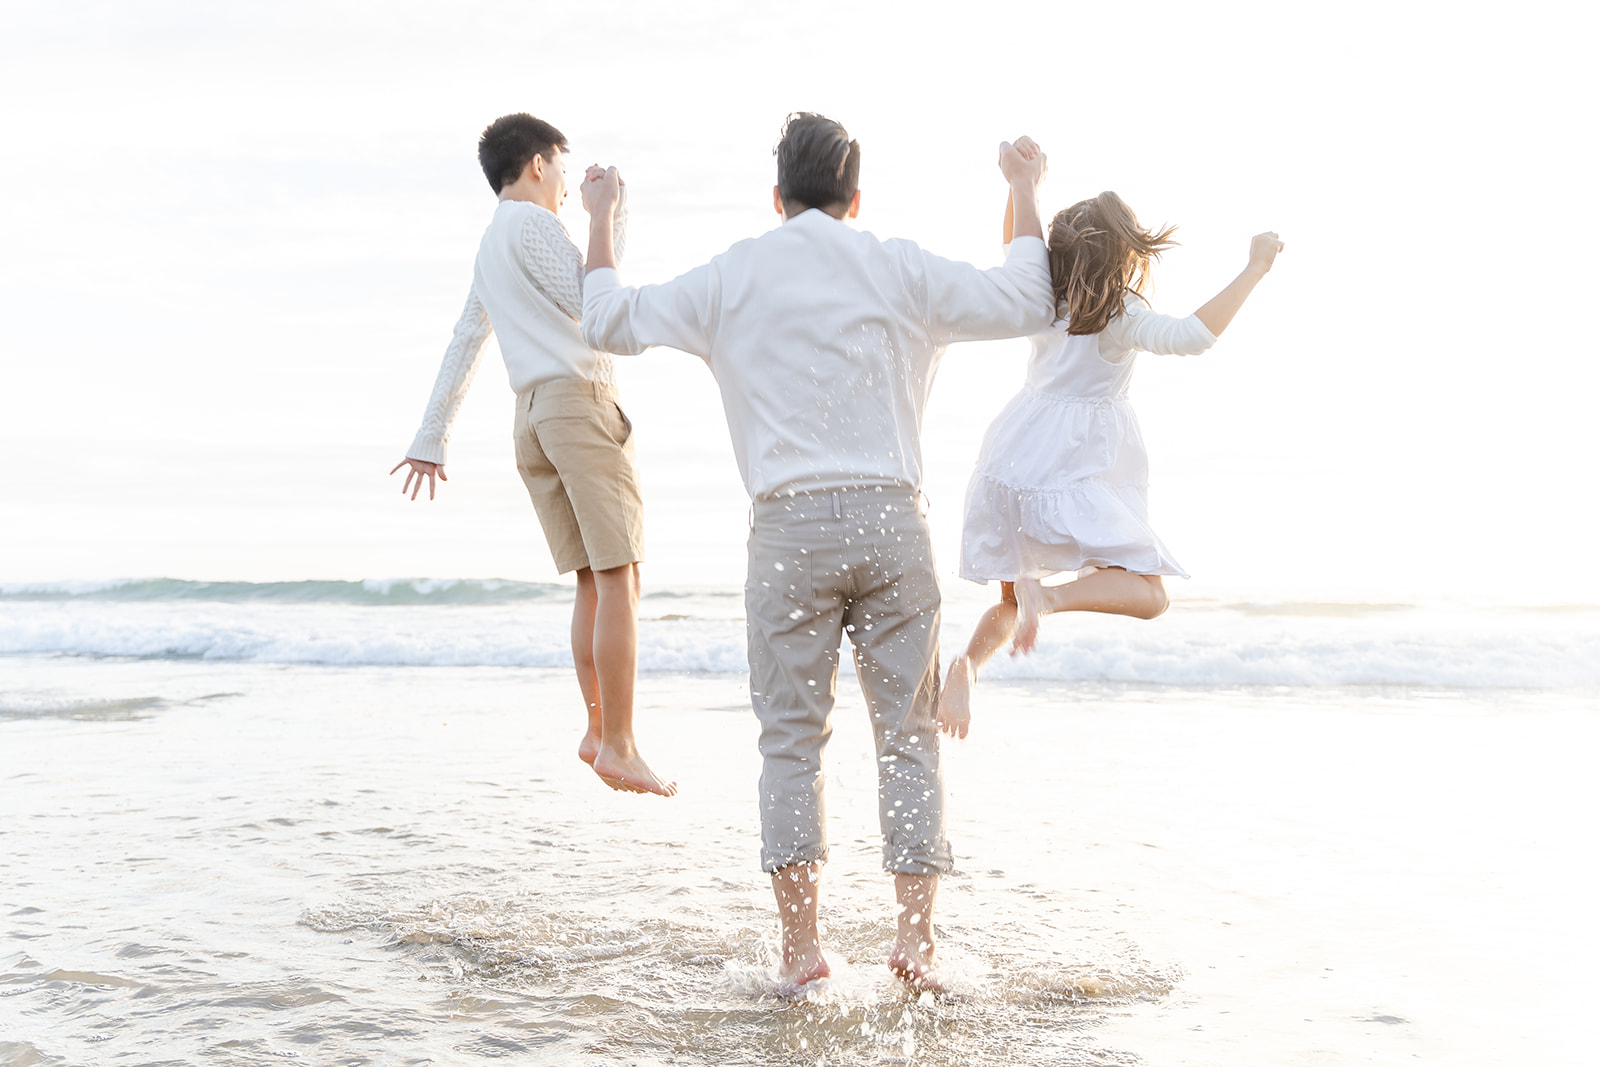 A father in a white shirt and khakis lifts his young son and daughter high up on the beach